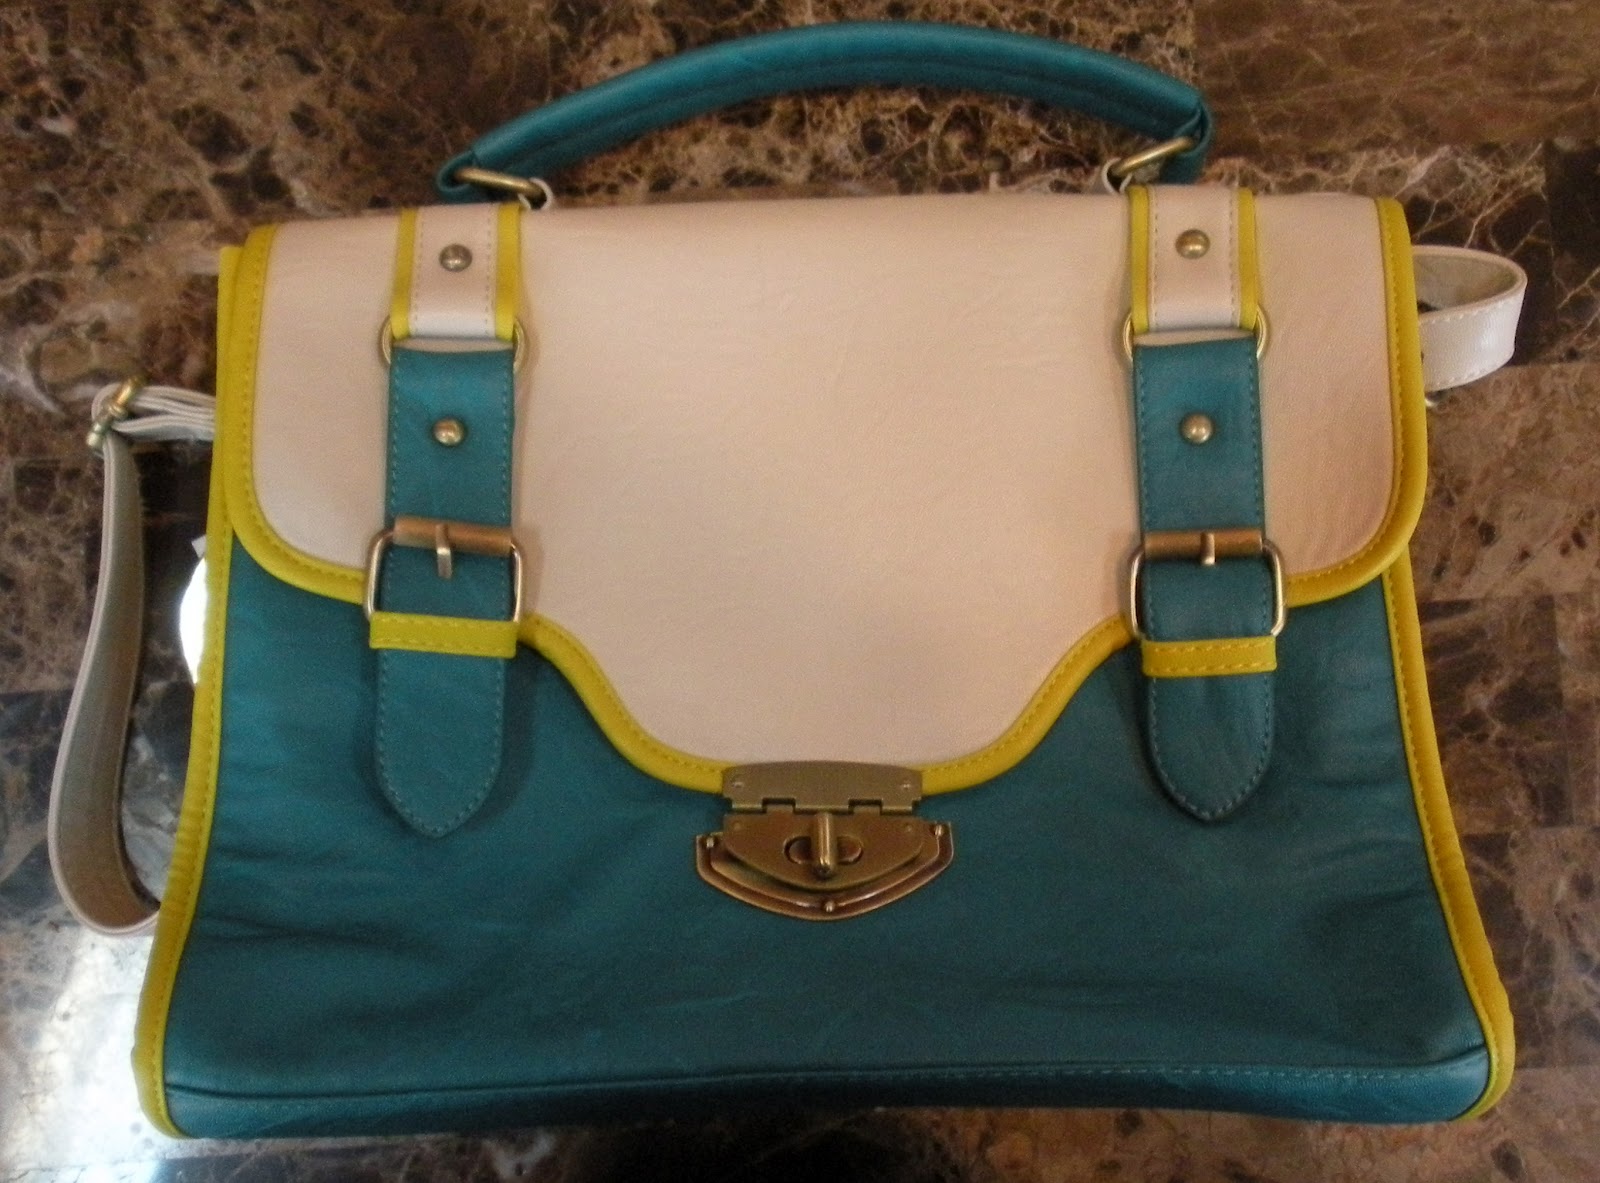 Little Black Bag - 3rd Purchase - Blue Skies for Me Please